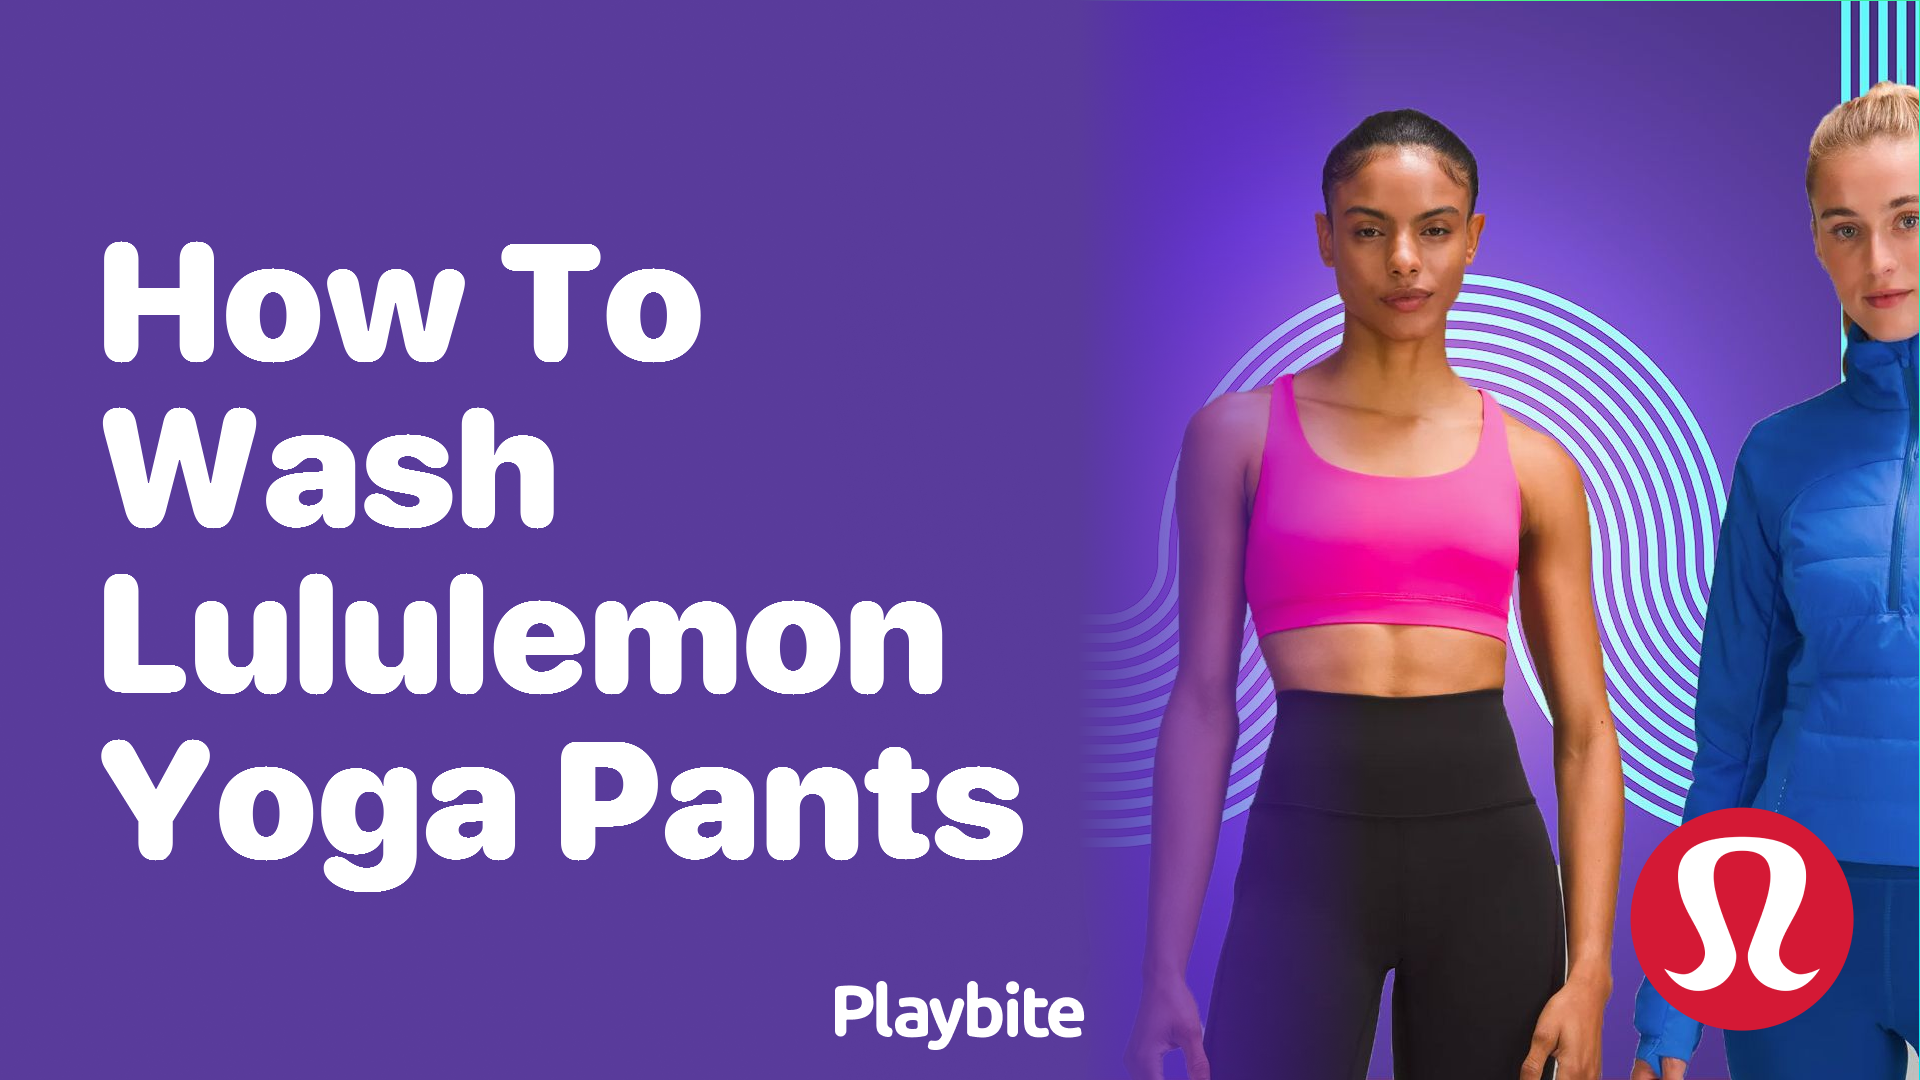 How to Wash Lululemon Yoga Pants: A Simple Guide - Playbite